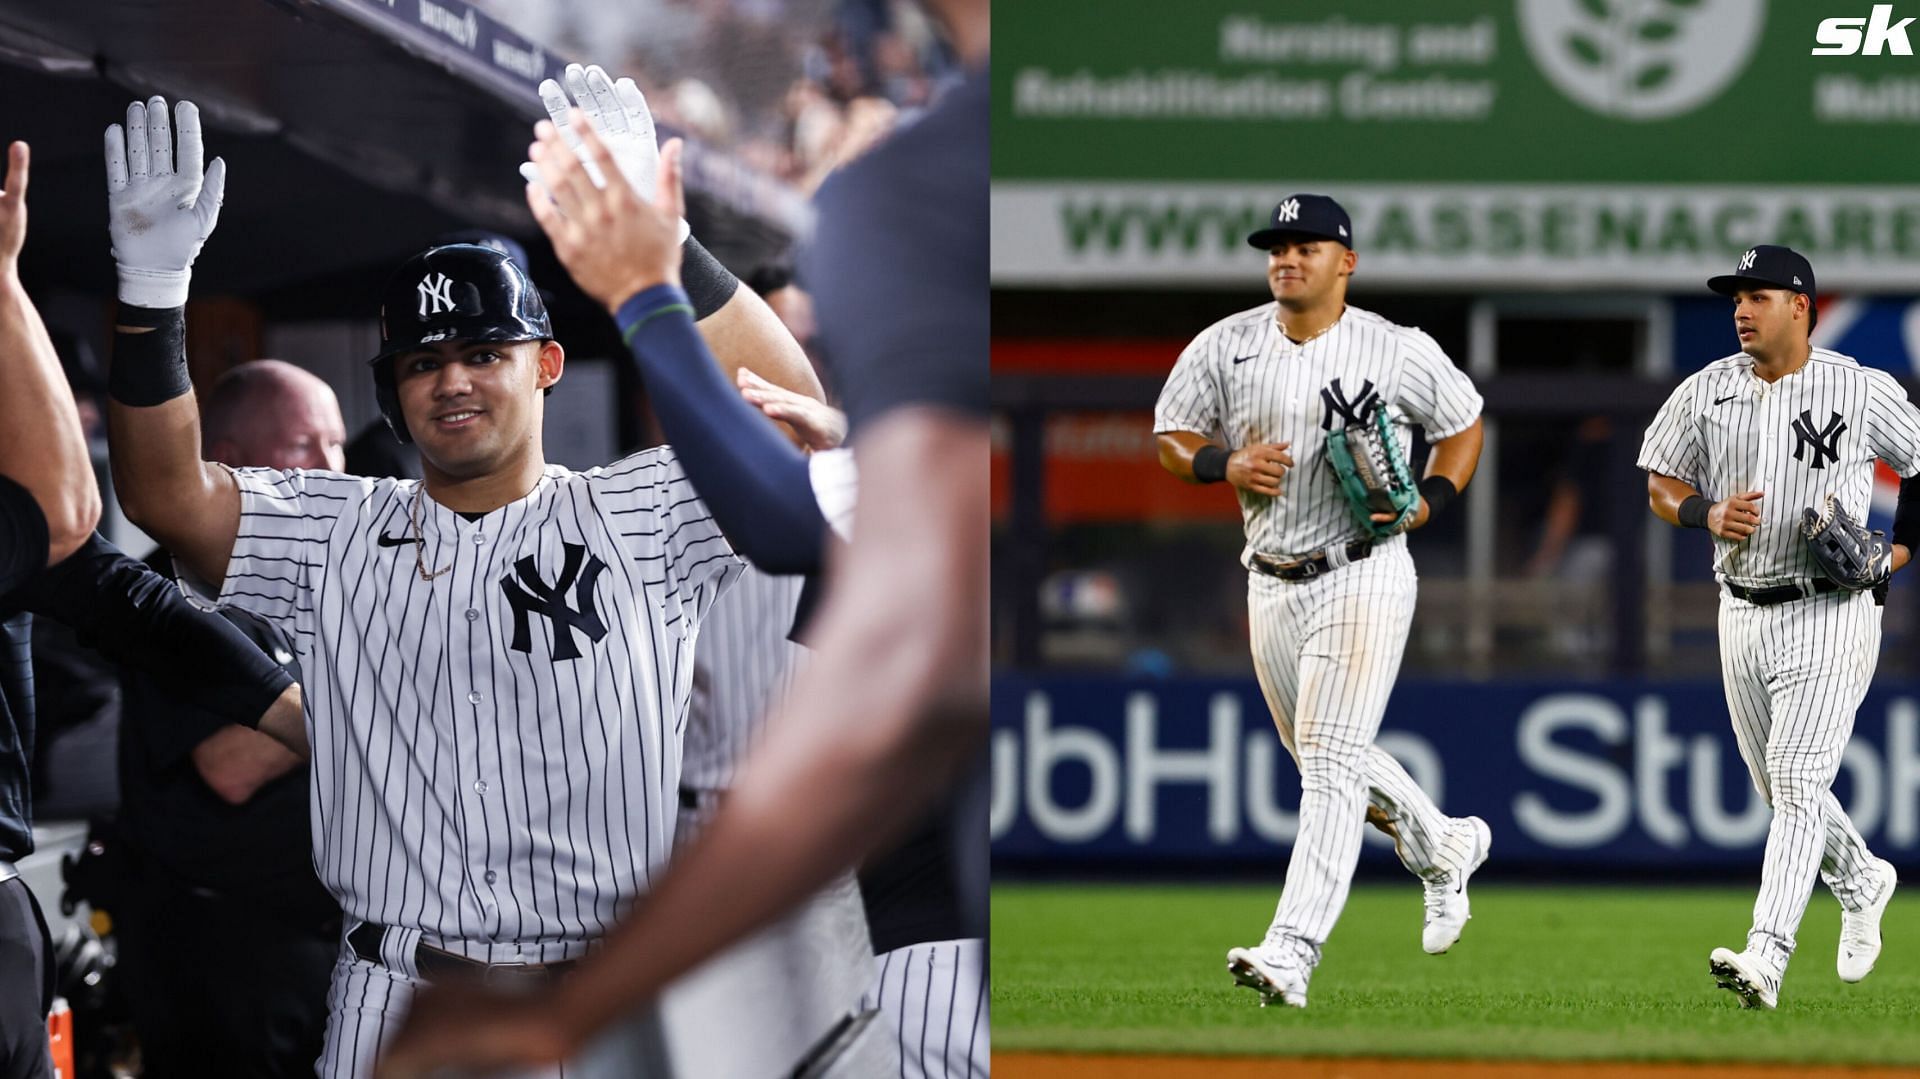 Jasson Dominguez has the Yankees fans excited for the future